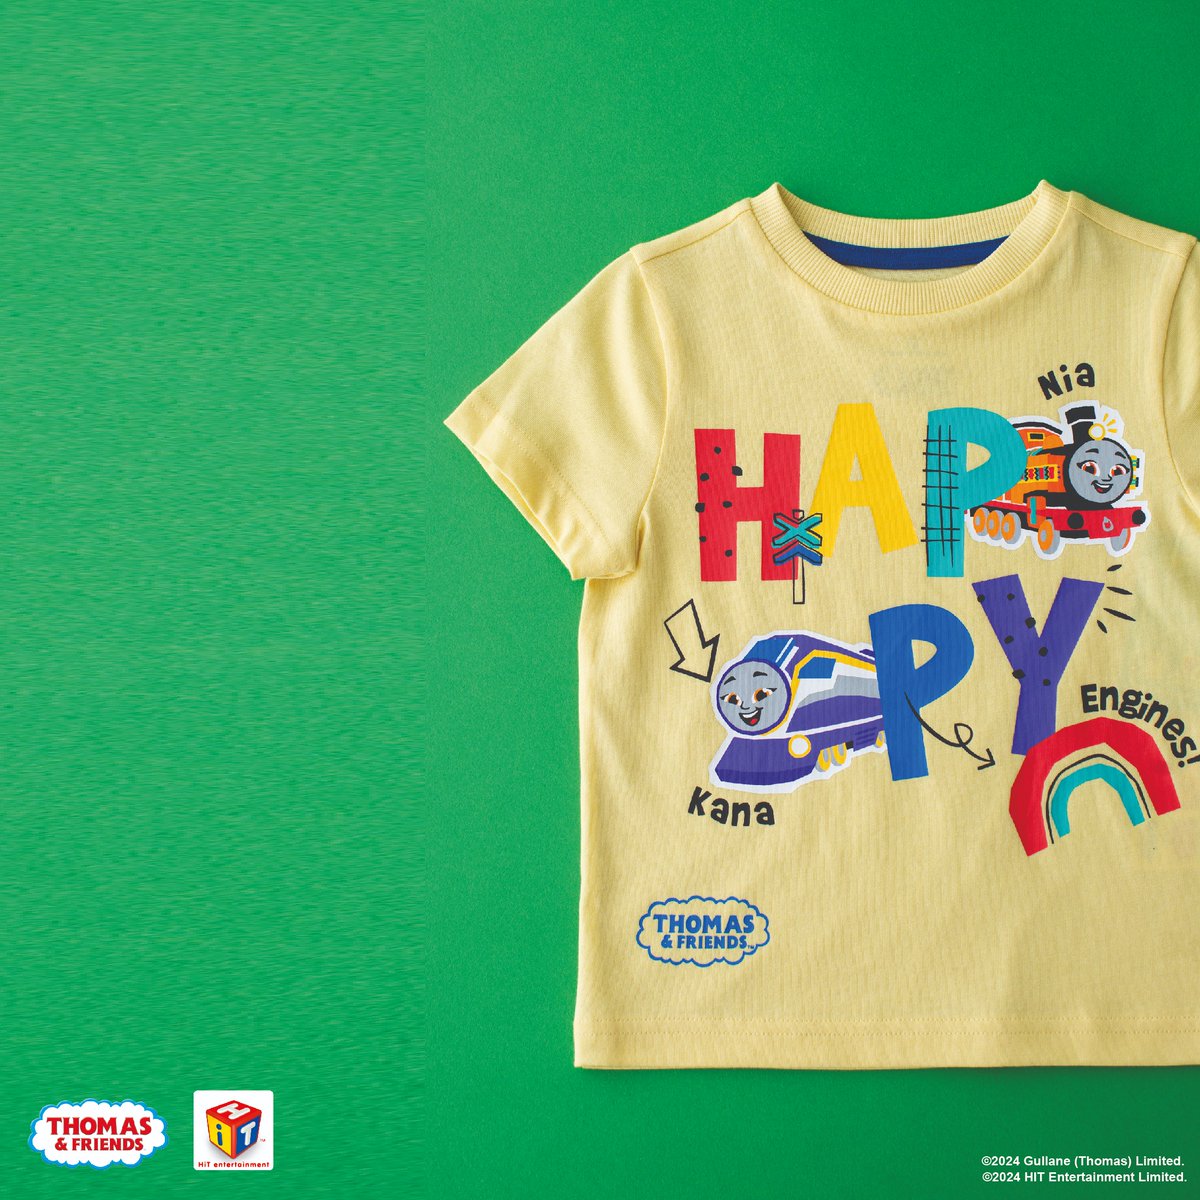 All-aboard! We’ve teamed up with F&F Clothing to create a new range of autism friendly Thomas & Friends clothing for autistic children aged 1 - 6 years. The collection is available exclusively at selected Tesco Extra stores until 29th April: bit.ly/4cuVlPY